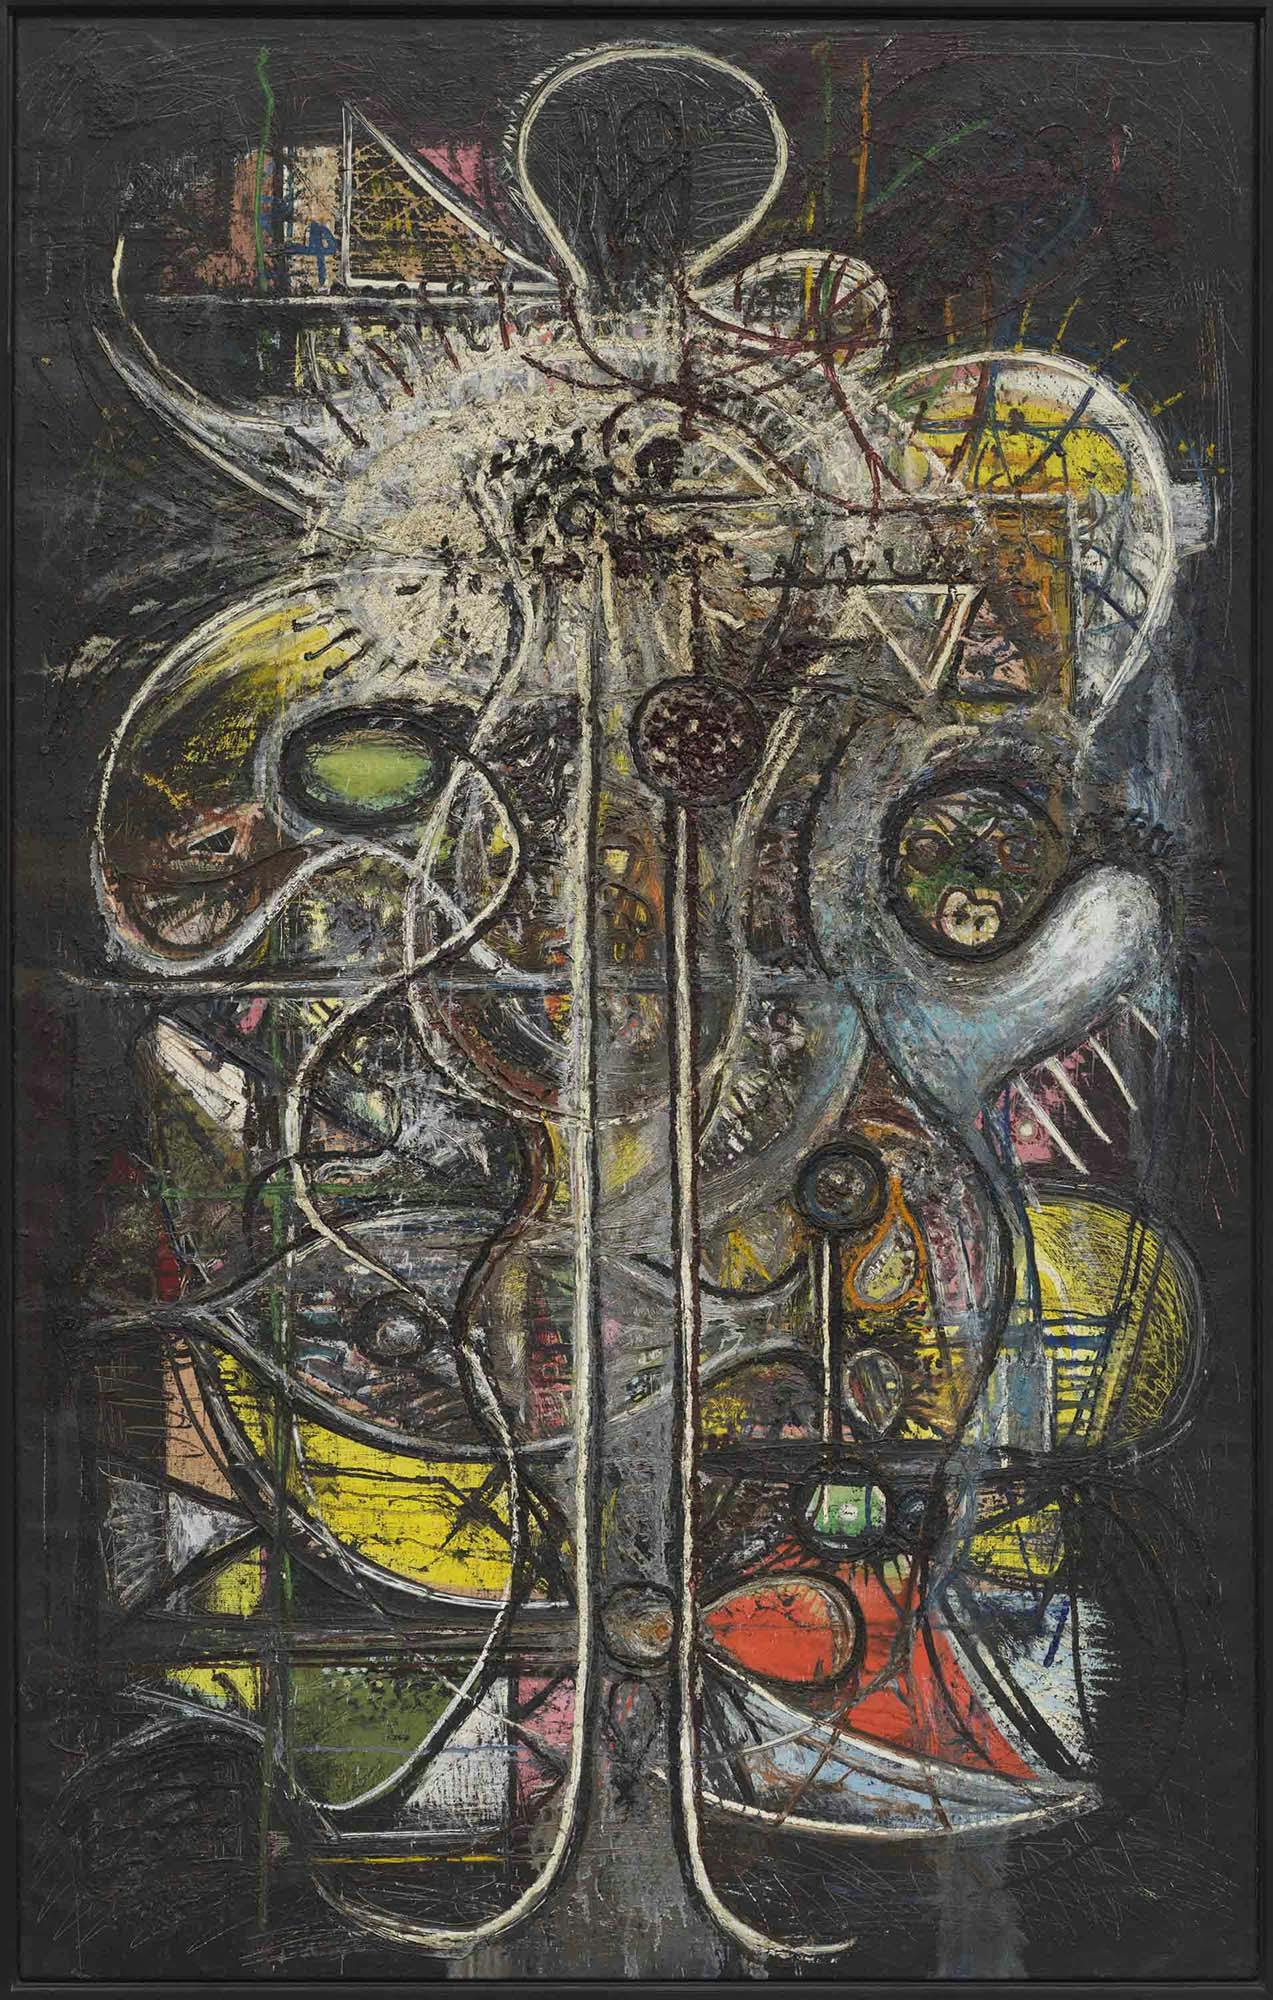 Crucifixion, Comprehension of the Atom
1944
Oil on linen
77 5/8 x 49 1/8 in. (197.2 x 124.8 cm)
 – The Richard Pousette-Dart Foundation